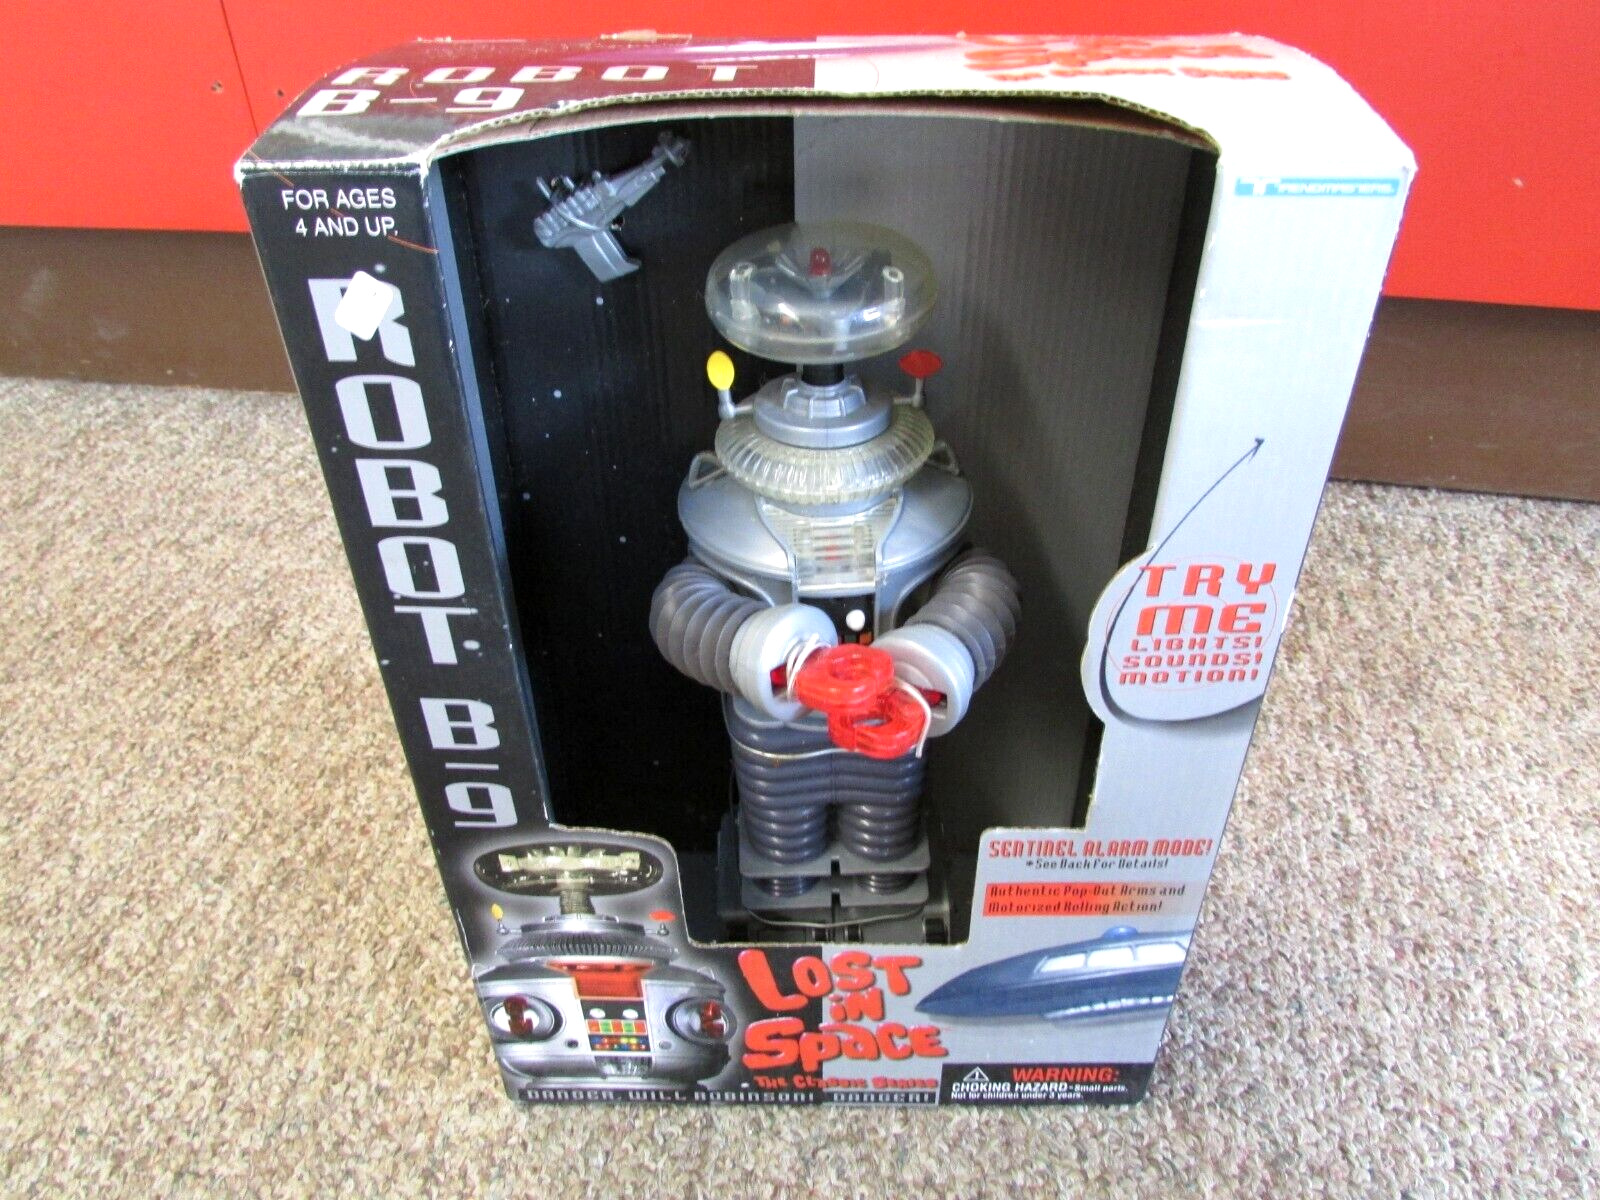 Vintage 1997 Lost In Space B9 Robot